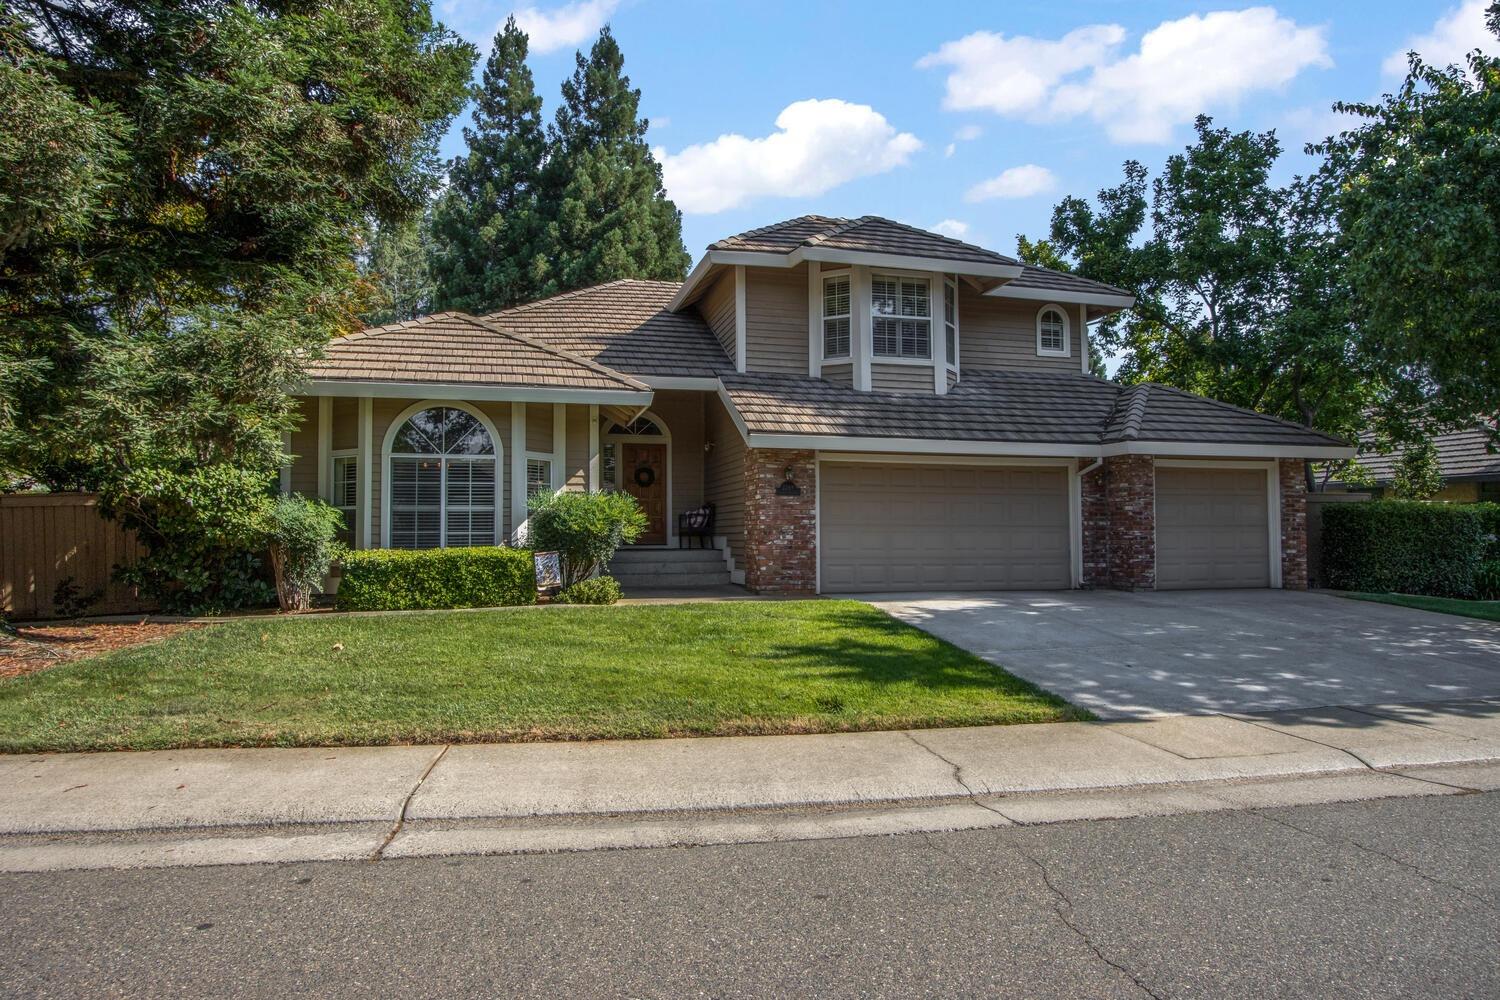 Choice Gold River location Eye catching curb appeal in this sought after 4BD (1 remote bedroom down)